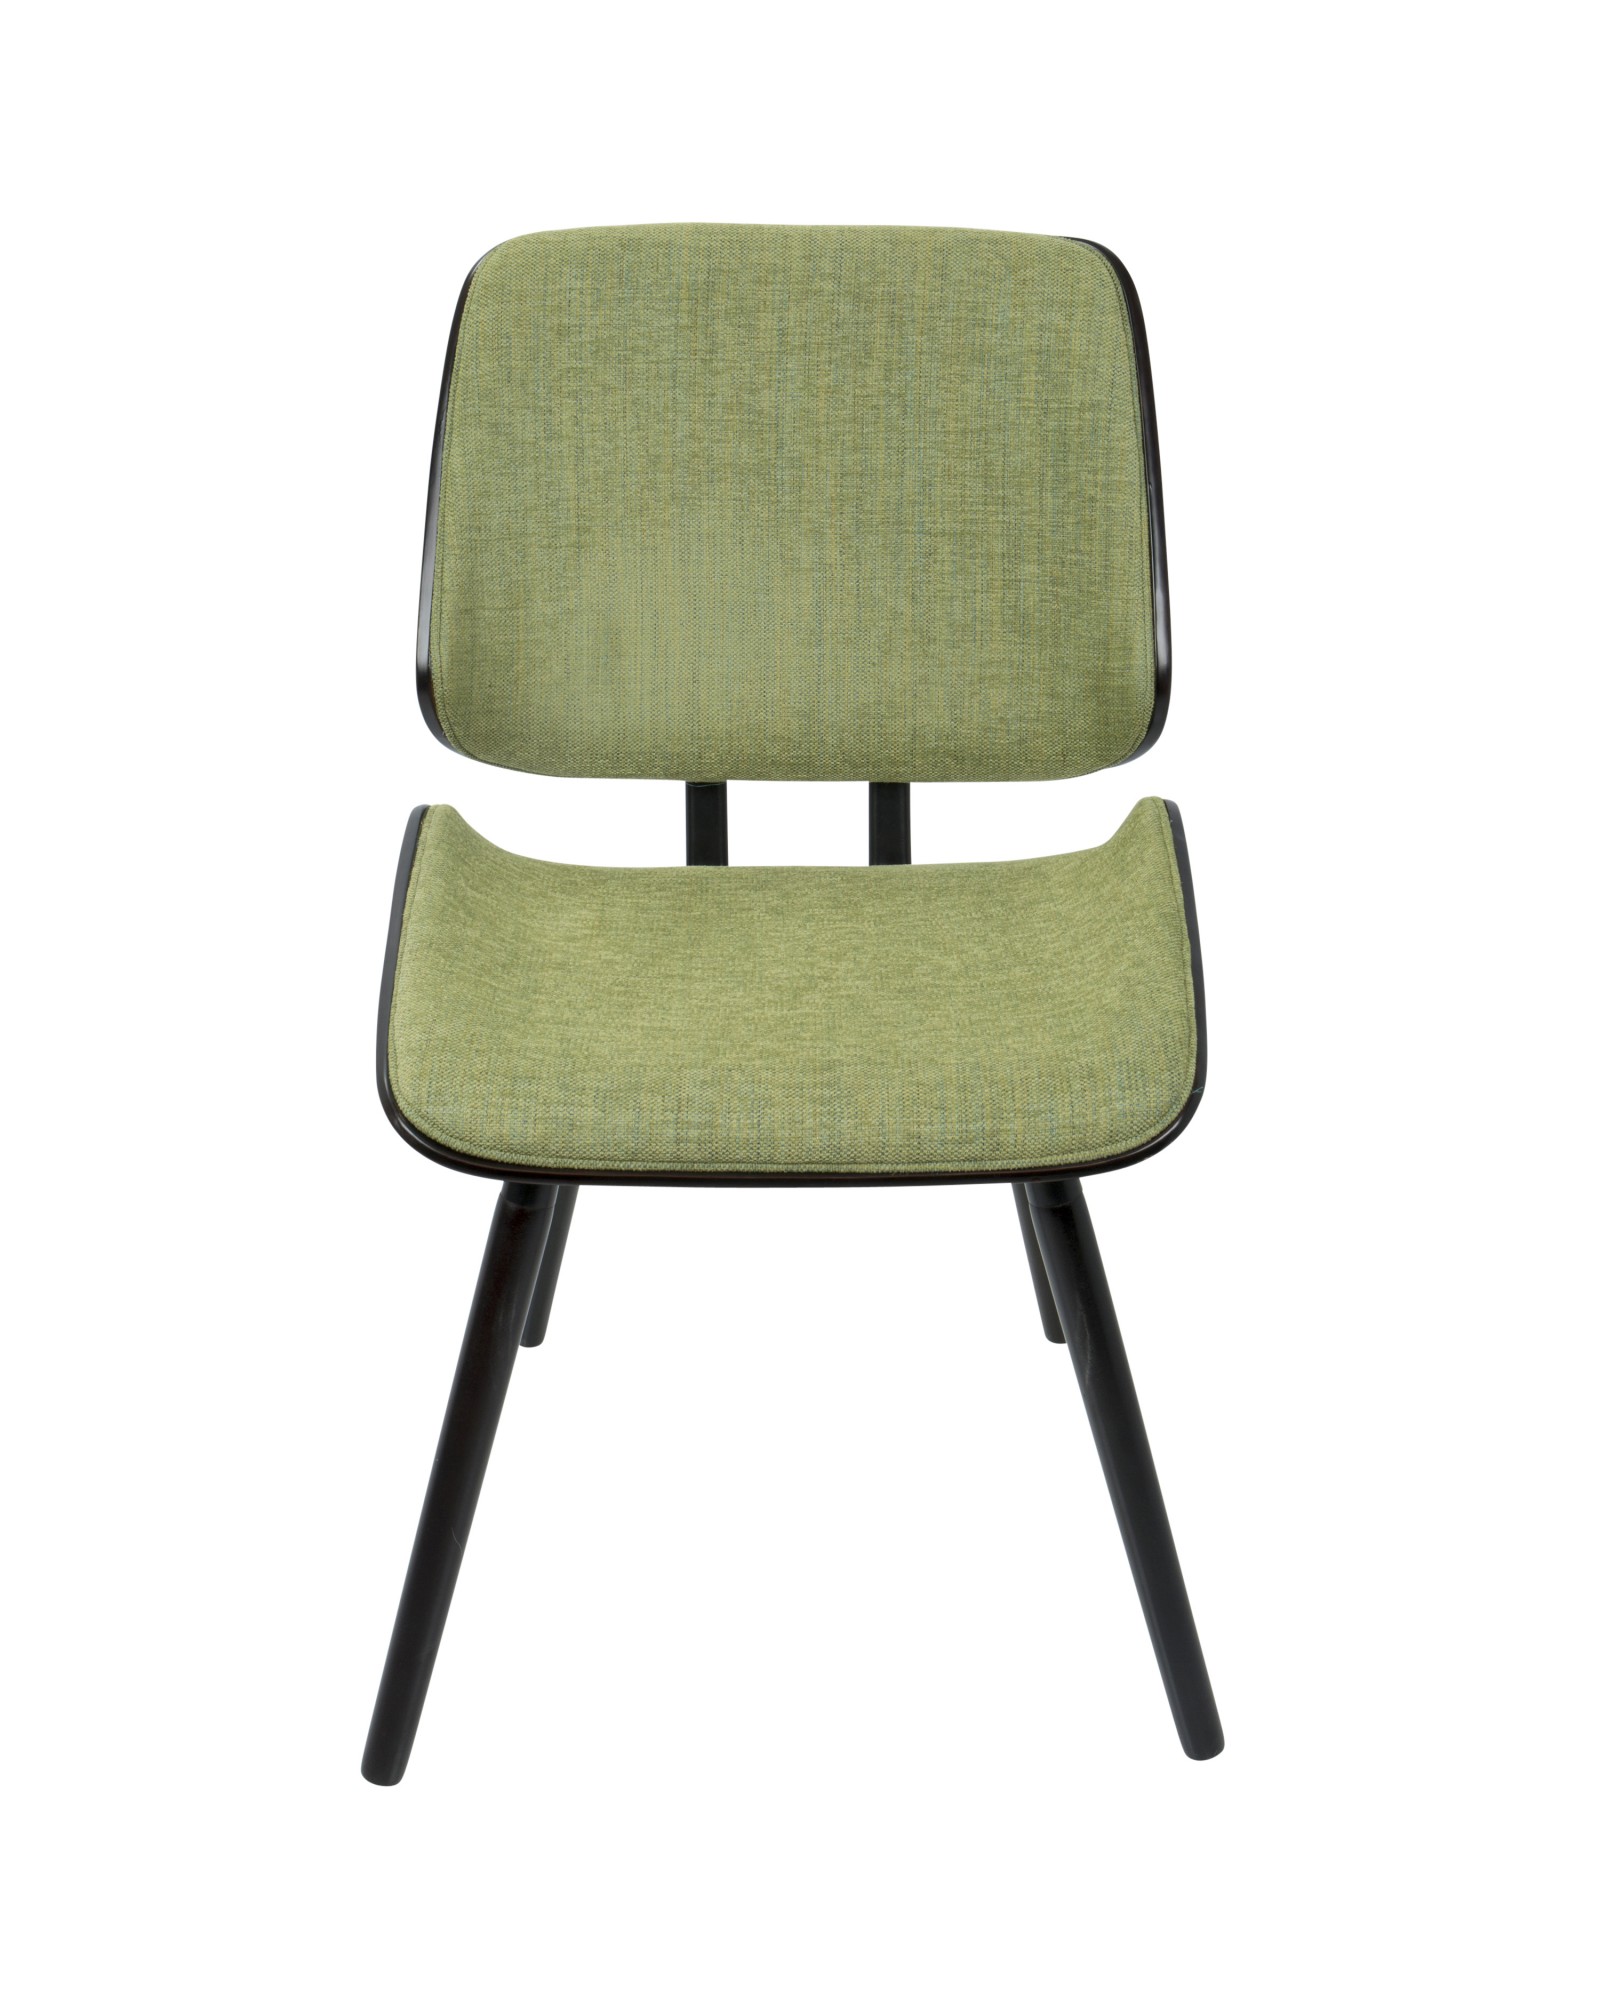 Lombardi Mid-Century Modern Dining/Accent Chair in Espresso with Green Fabric - Set of 2